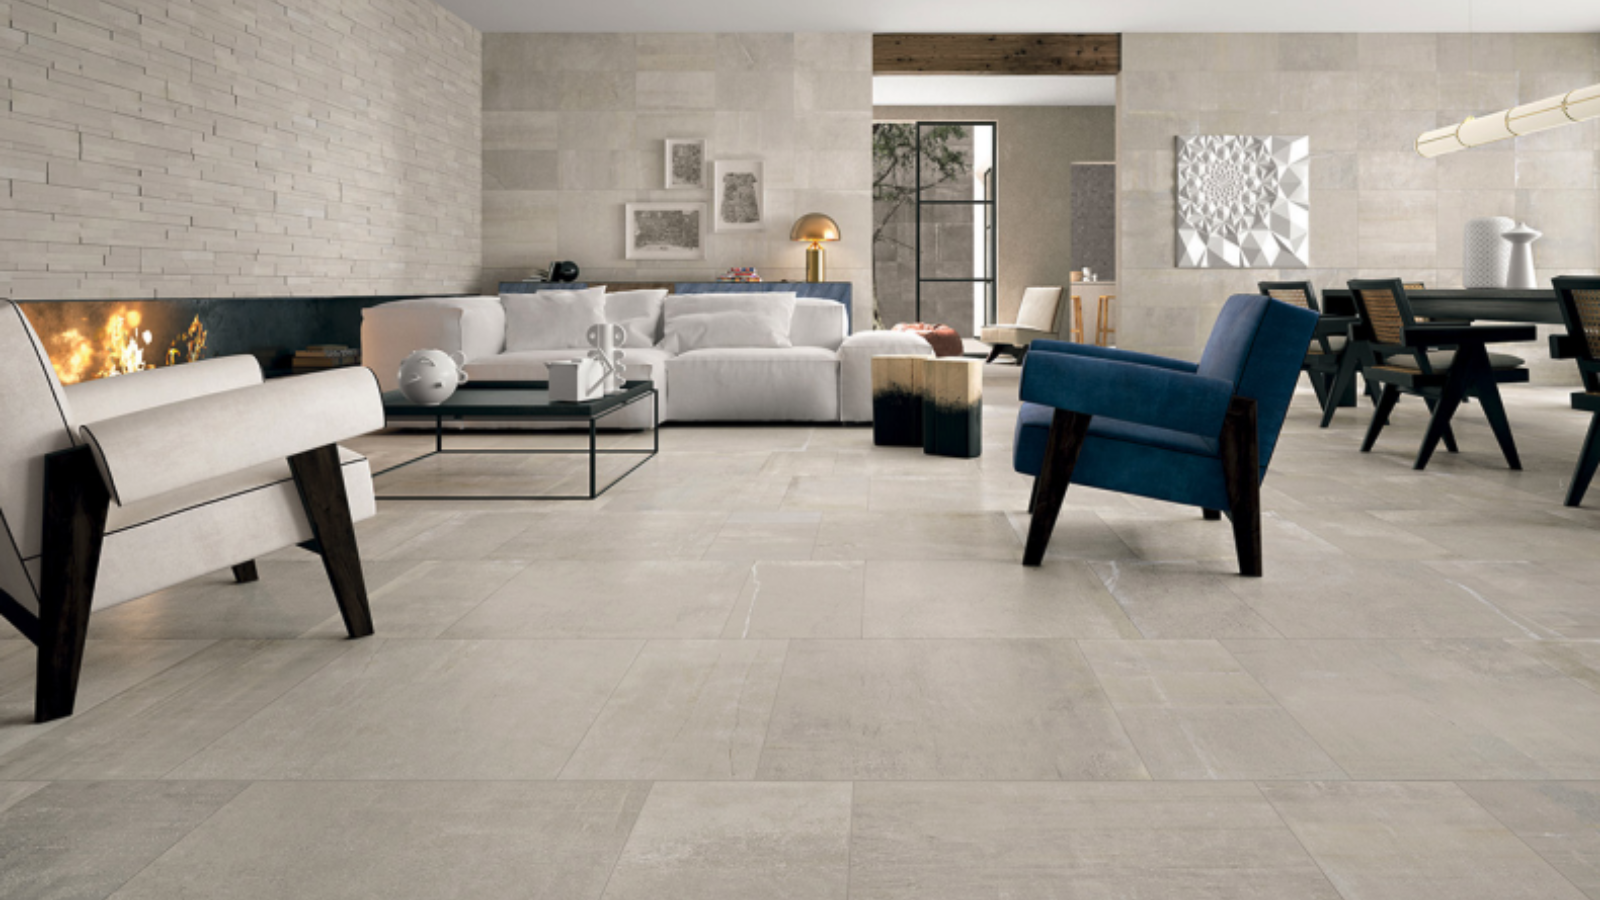 Tile trends to follow in 2019